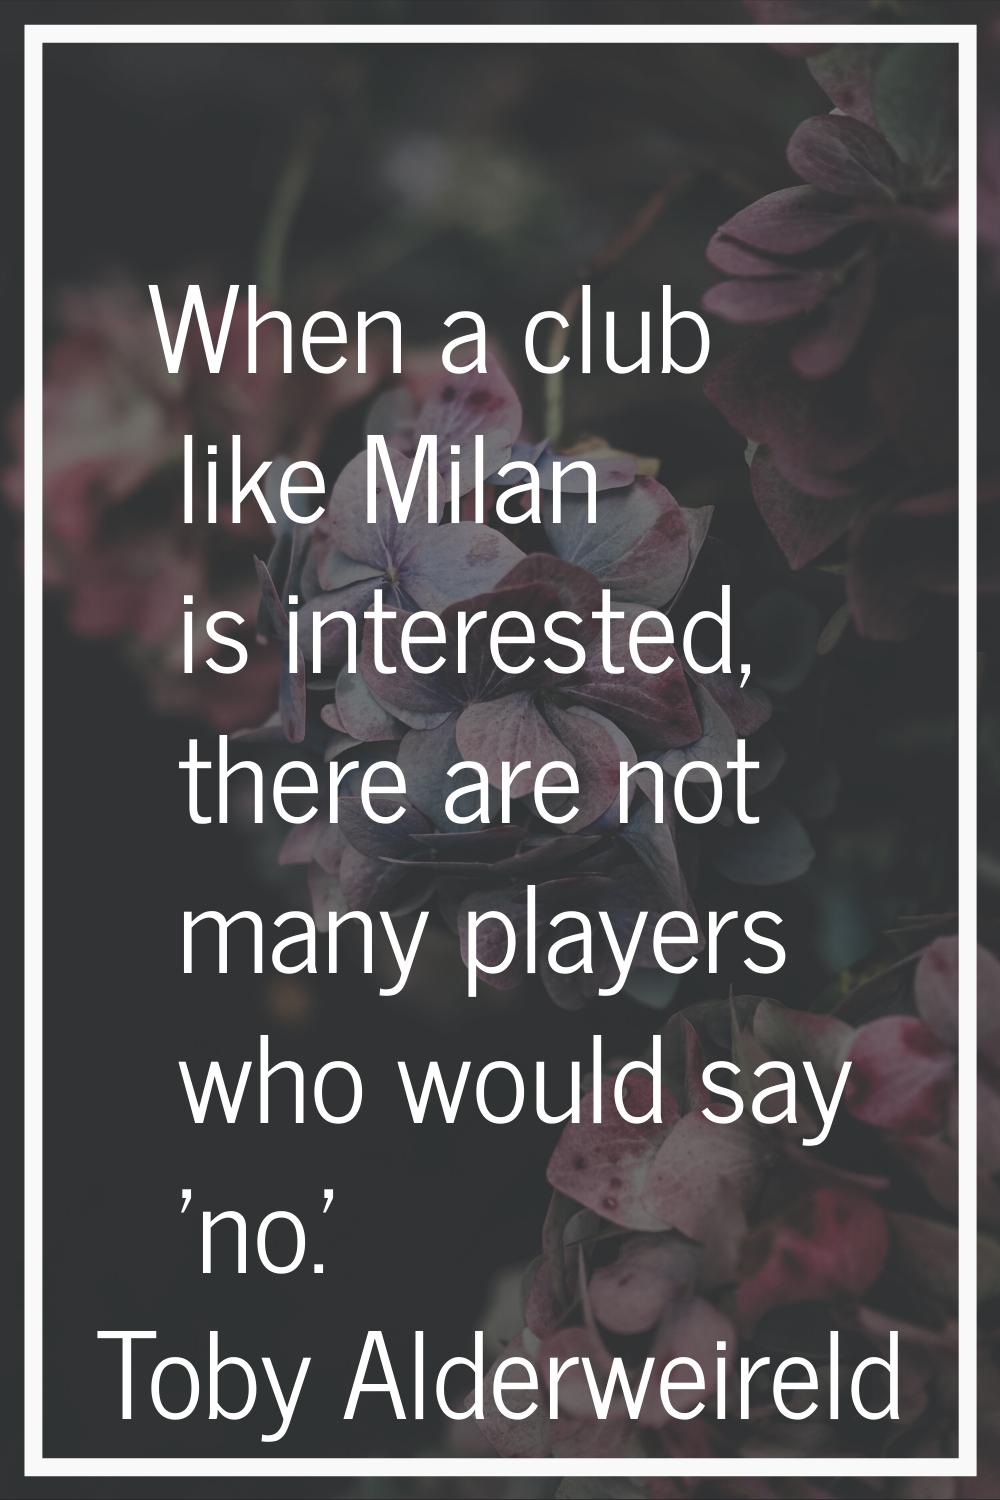 When a club like Milan is interested, there are not many players who would say 'no.'